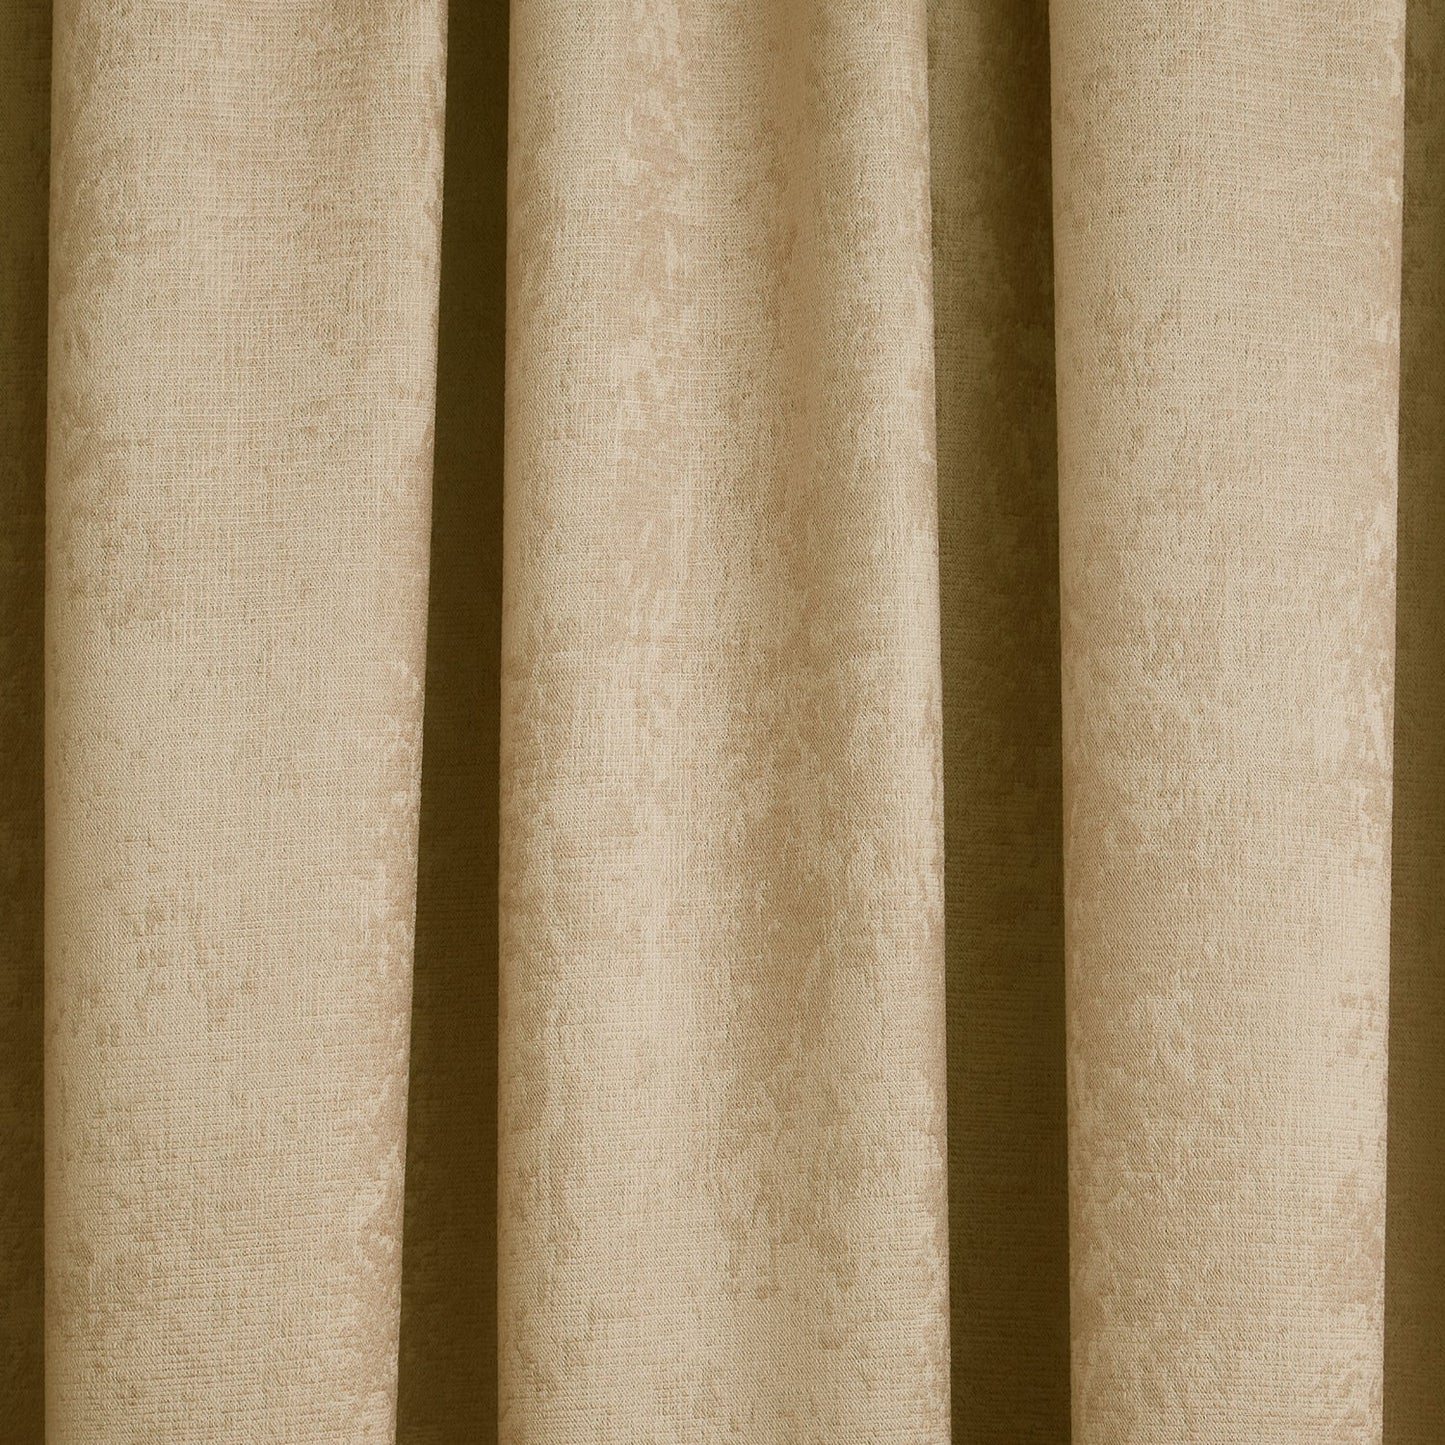 Galaxy Ochre Yellow Dim Out Pencil Pleat Curtains